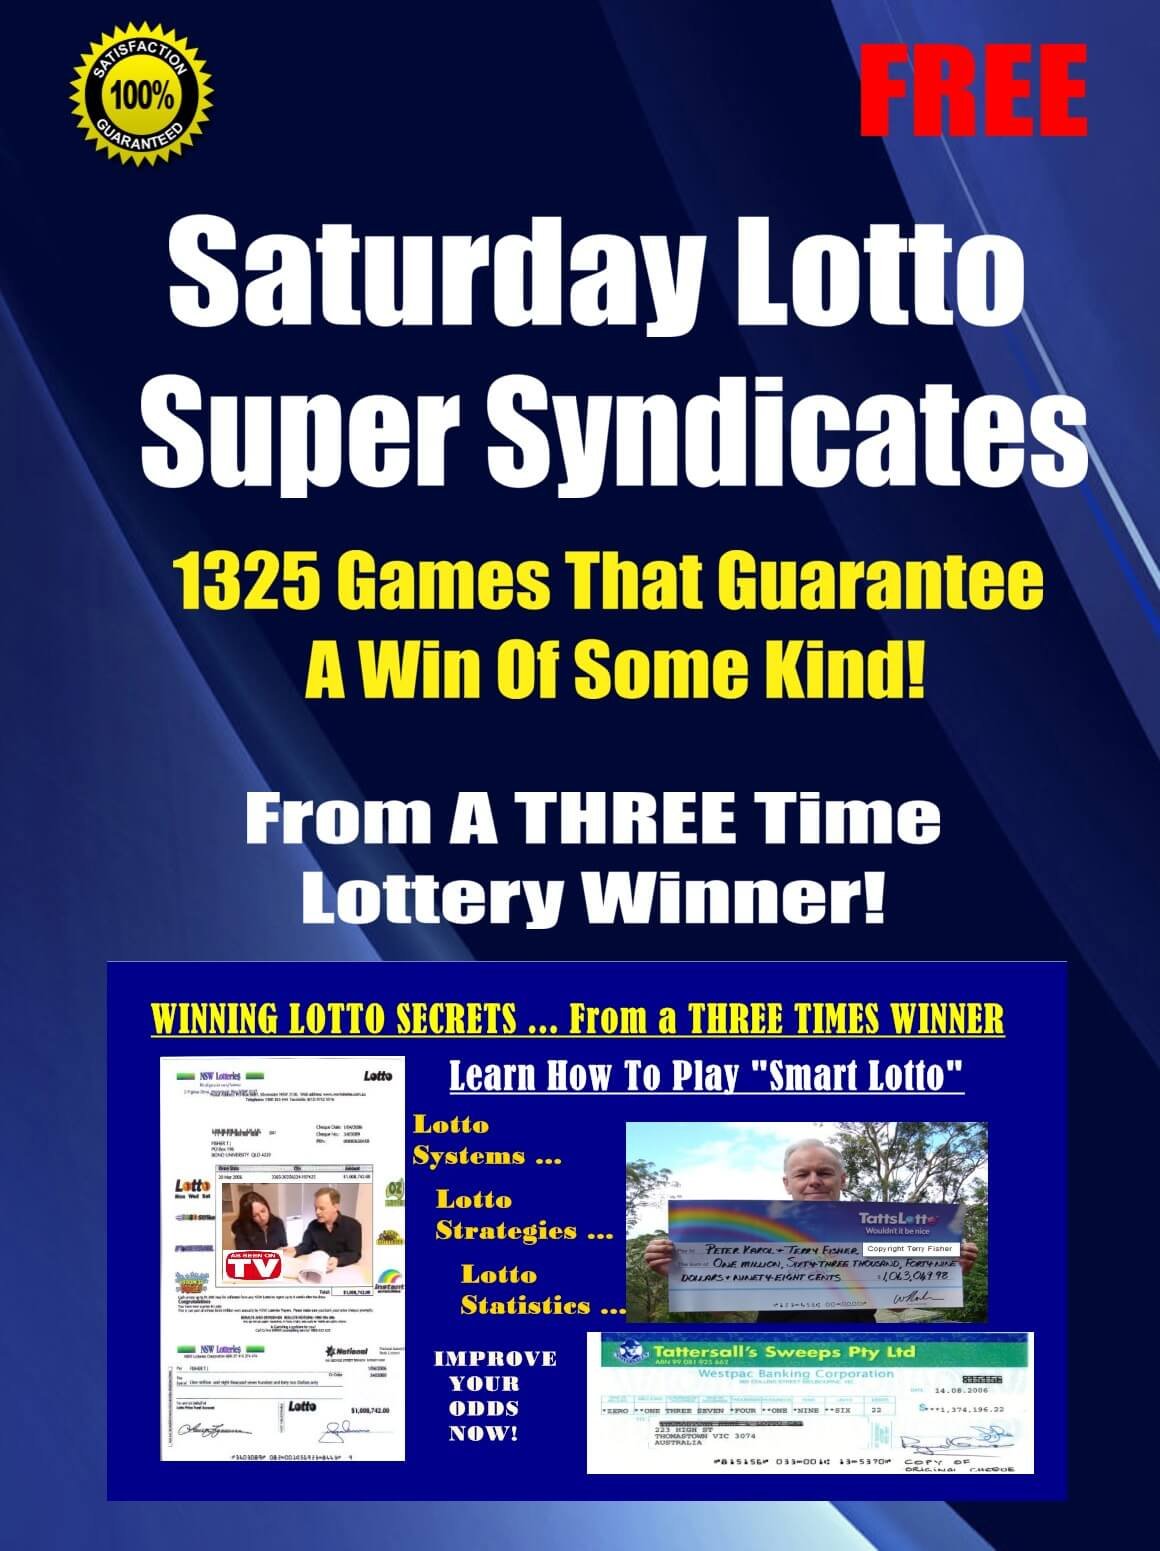 Looking for a Free Lotto Report?